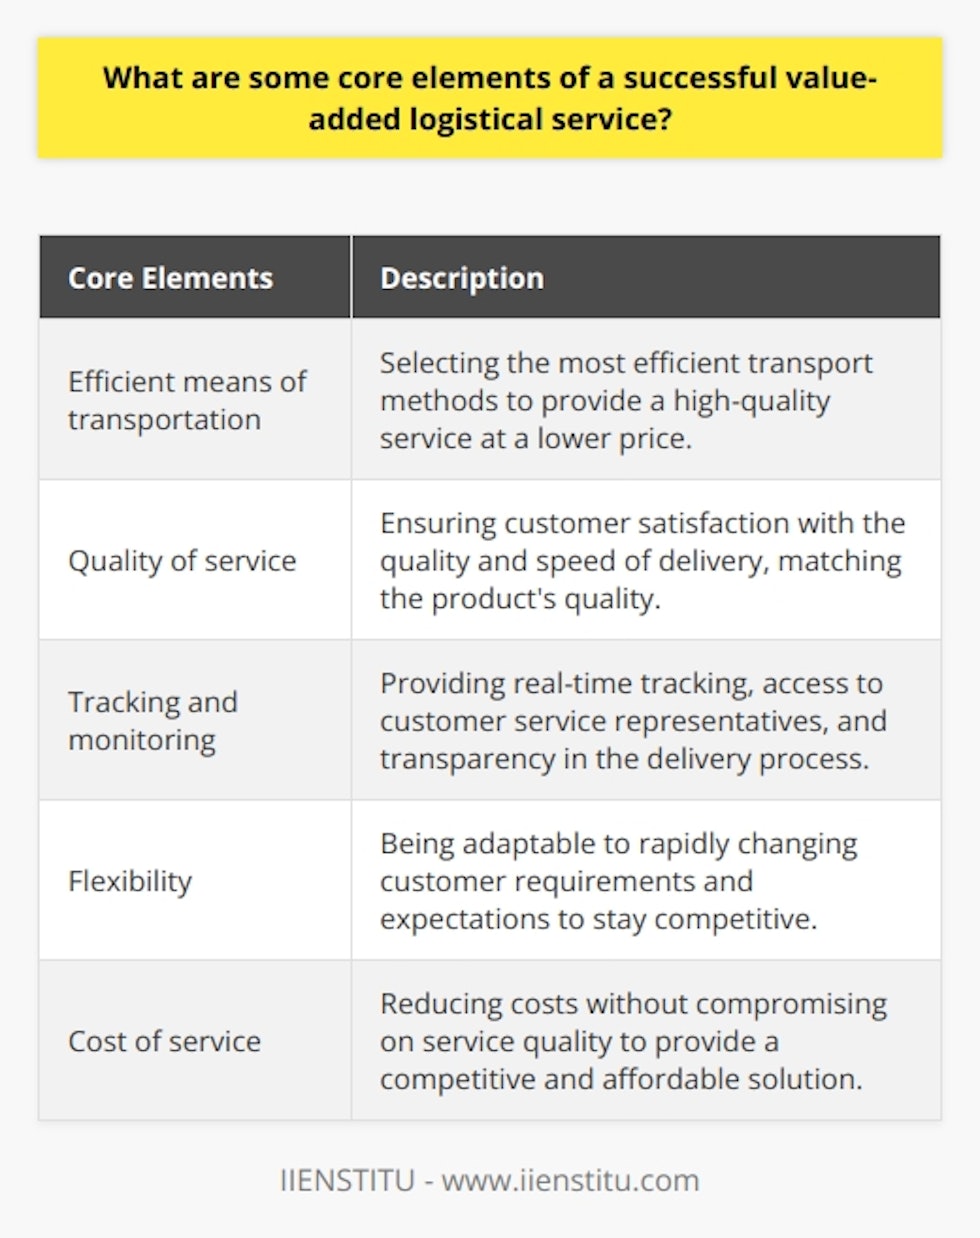 Logistical services play a crucial role in the success of businesses today. In order to differentiate themselves and provide a premium solution to customers, businesses must offer value-added logistical services. These services go beyond the traditional transport of products and focus on enhancing the customer experience. In this article, we will explore some core elements that contribute to the success of a value-added logistical service.The first core element is the selection of efficient means of transportation. The choice of transportation method can have a significant impact on the overall cost of the service. By selecting the most efficient means of transport, businesses can provide a high-quality service at a lower price. This may involve using traditional ground and air transportation methods, as well as more innovative and cost-effective alternatives such as rail transport and in-house warehouses.The second core element of a successful value-added logistical service is the quality of the service provided. Once a customer receives their shipment, it is important that they are satisfied with the quality and speed of the delivery. The customer service provided should match the quality of the product itself. When customers feel that their needs have been met, they are more likely to return and become loyal to the business.The third core element is tracking and monitoring the shipment. Customers expect to be able to track their shipments in real-time and have access to customer service representatives who can address their concerns and provide accurate information. By providing reliable tracking and monitoring services, businesses can enhance the customer experience and ensure transparency in the delivery process.The fourth core element is flexibility. In today's fast-paced world, customer requirements and expectations can change rapidly. It is crucial for logistical service providers to be flexible and adaptable to meet these changing demands. By being able to adjust quickly and efficiently, businesses can stay competitive in the ever-changing marketplace.The fifth and final core element is the cost of the service. While it is important to provide value to customers, the cost of the service should also be attractive. Logistical service providers should strive to reduce costs without compromising on the quality of service. This ensures that customers receive a competitive and affordable solution.In conclusion, successful value-added logistical services encompass various core elements, including efficient transportation methods, high-quality service provision, reliable tracking and monitoring, flexibility to meet changing demands, and competitive pricing. These elements are crucial for businesses to remain competitive in today's evolving marketplace.